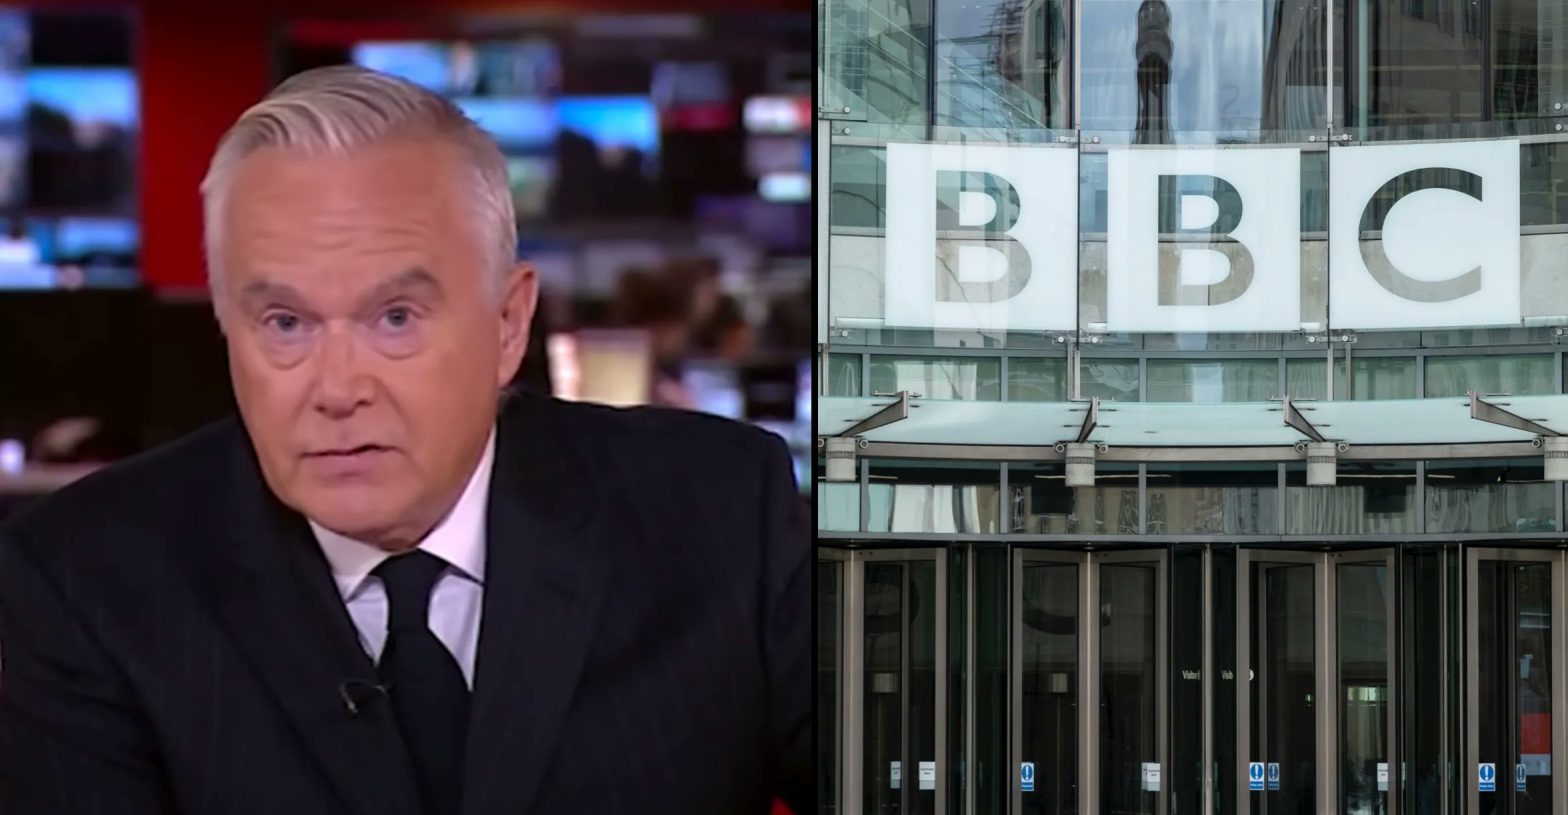 Huw Edwards sent ‘inappropriate and flirtatious’ messages to junior BBC colleagues: Report